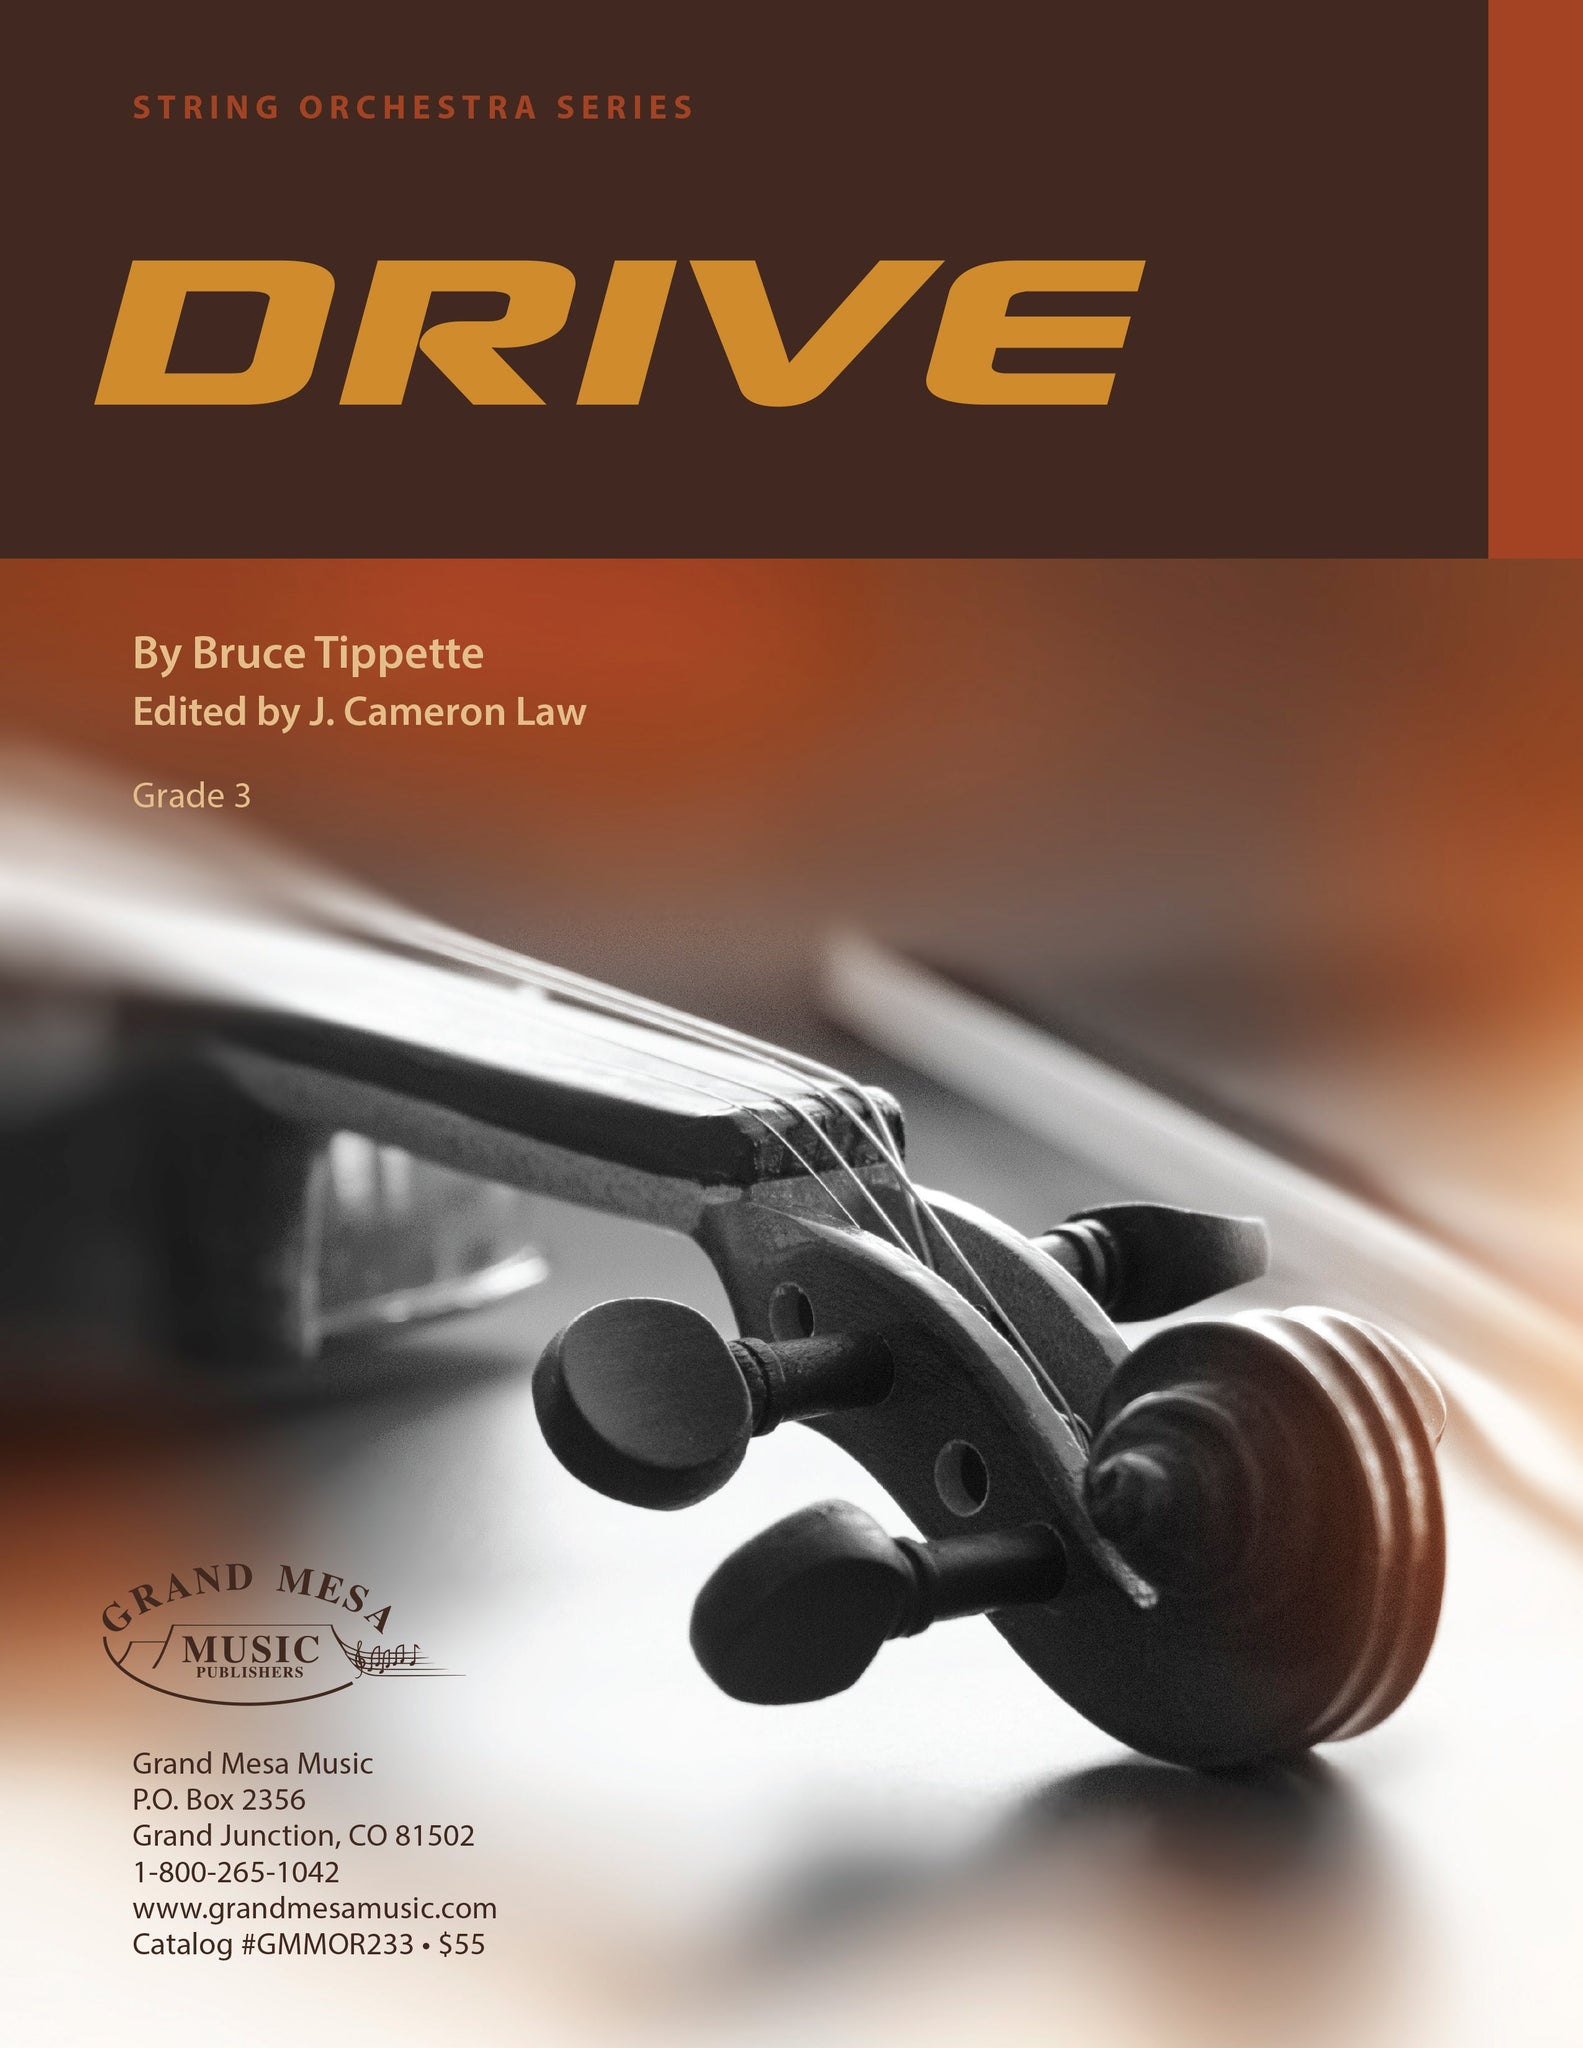 Strings sheet music cover of Drive, composed by Bruce Tippette.